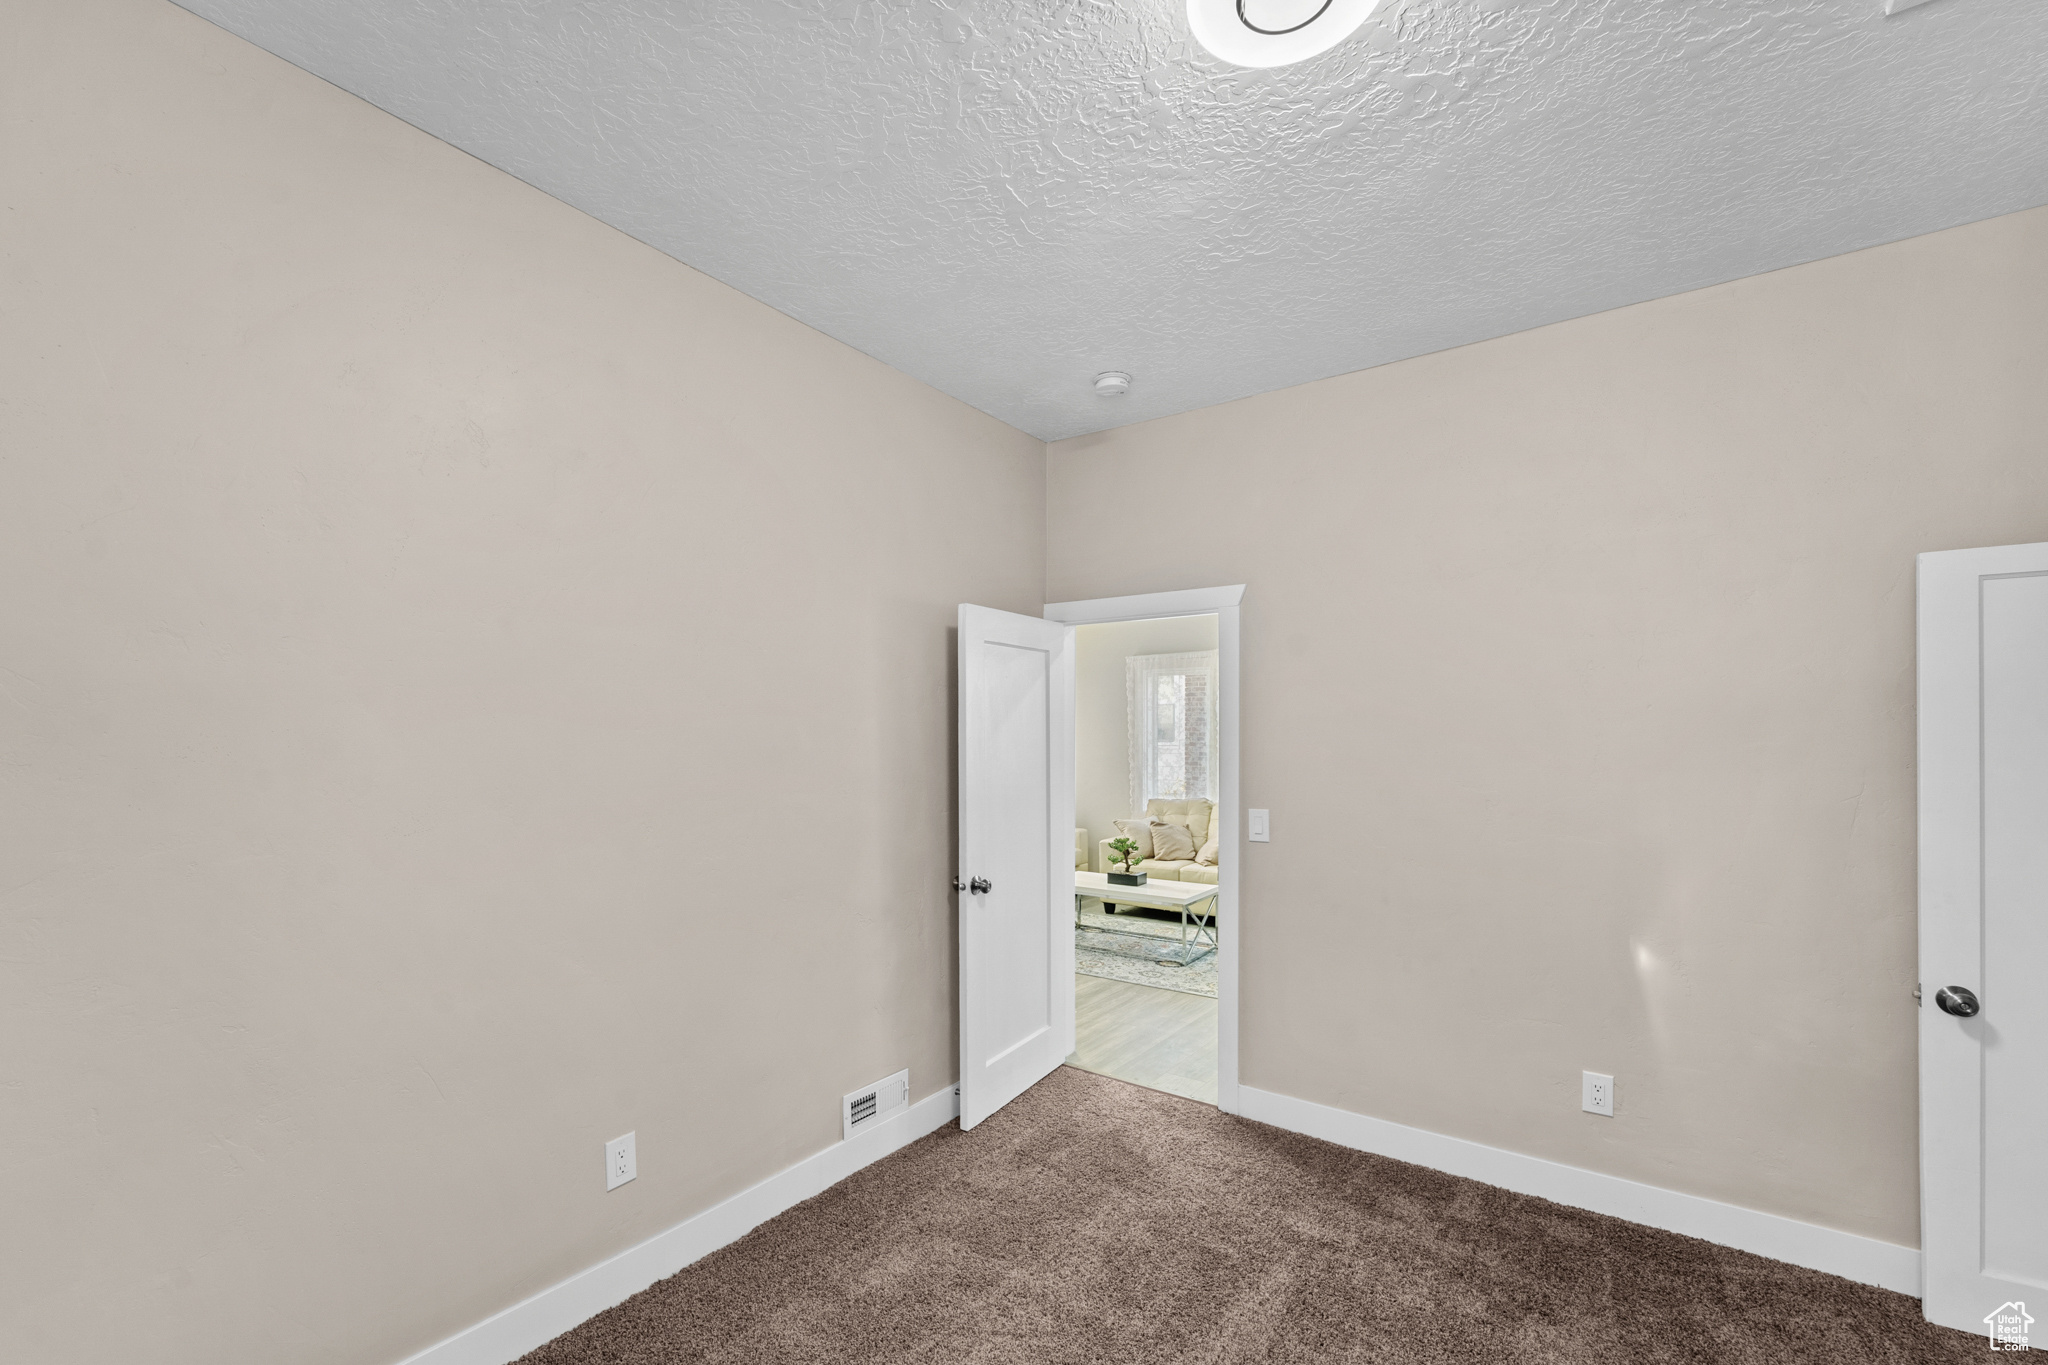 Unfurnished bedroom with dark carpet and a textured ceiling